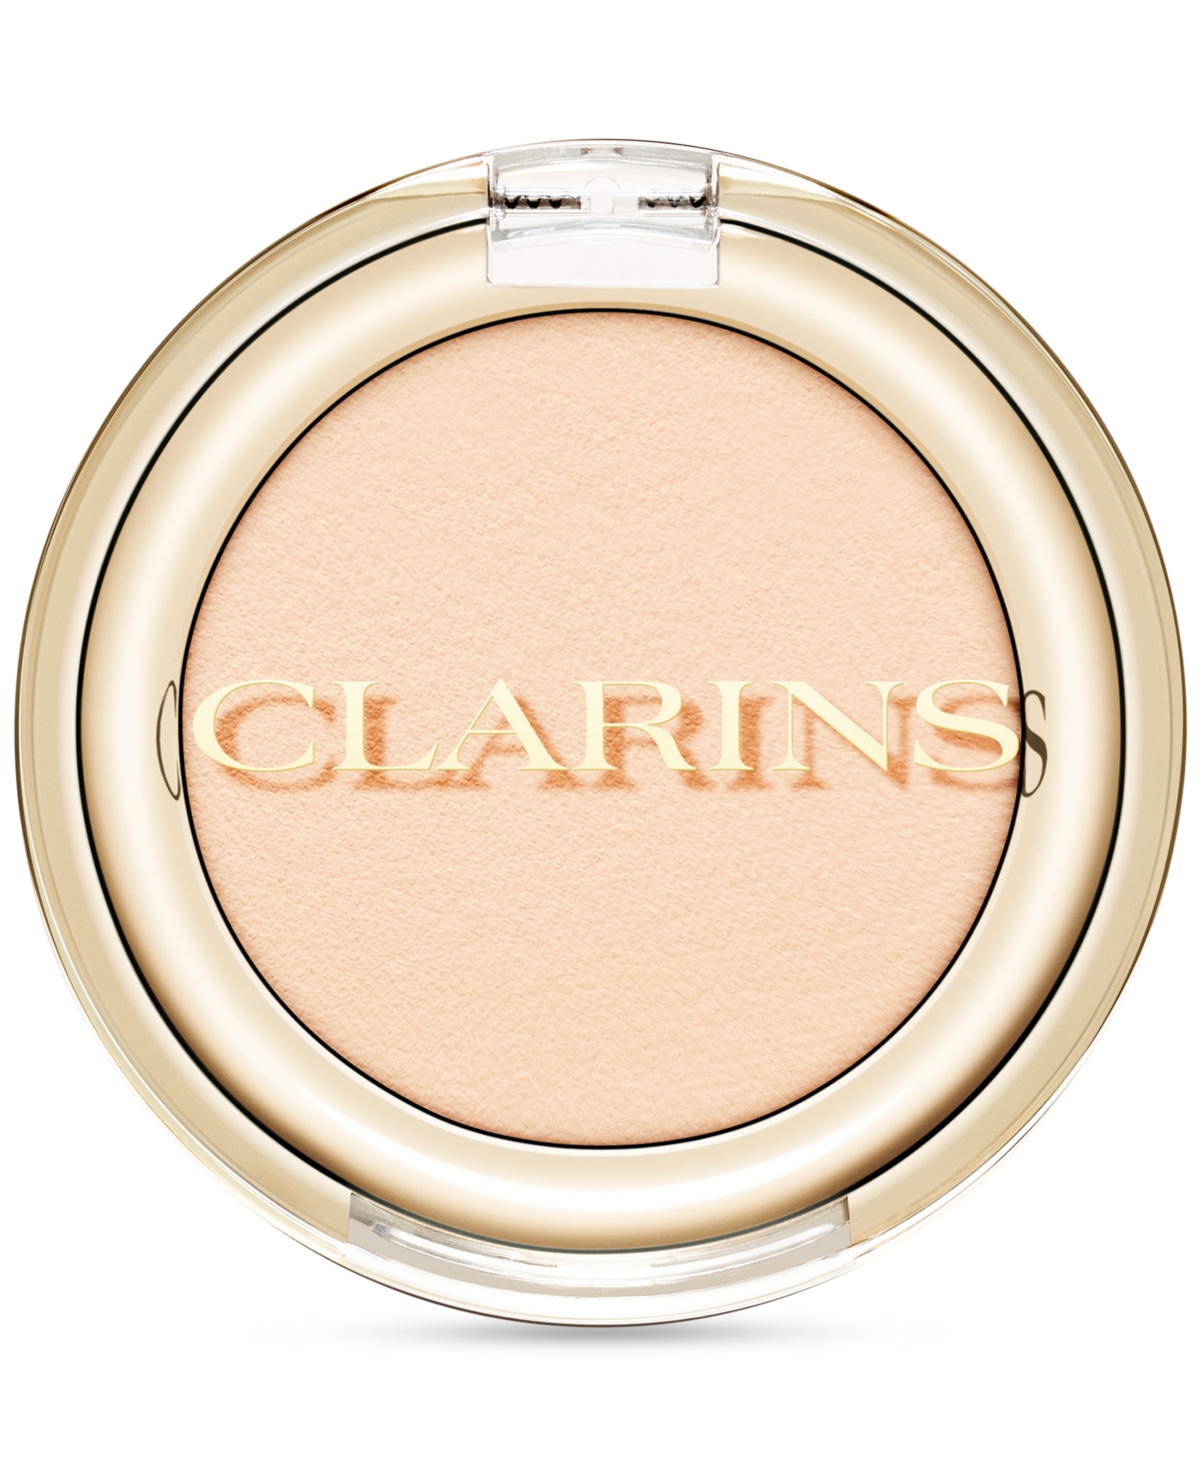 Clarins Ombre Skin Highly Pigmented & Crease-proof Eyeshadow In Matte Ivory